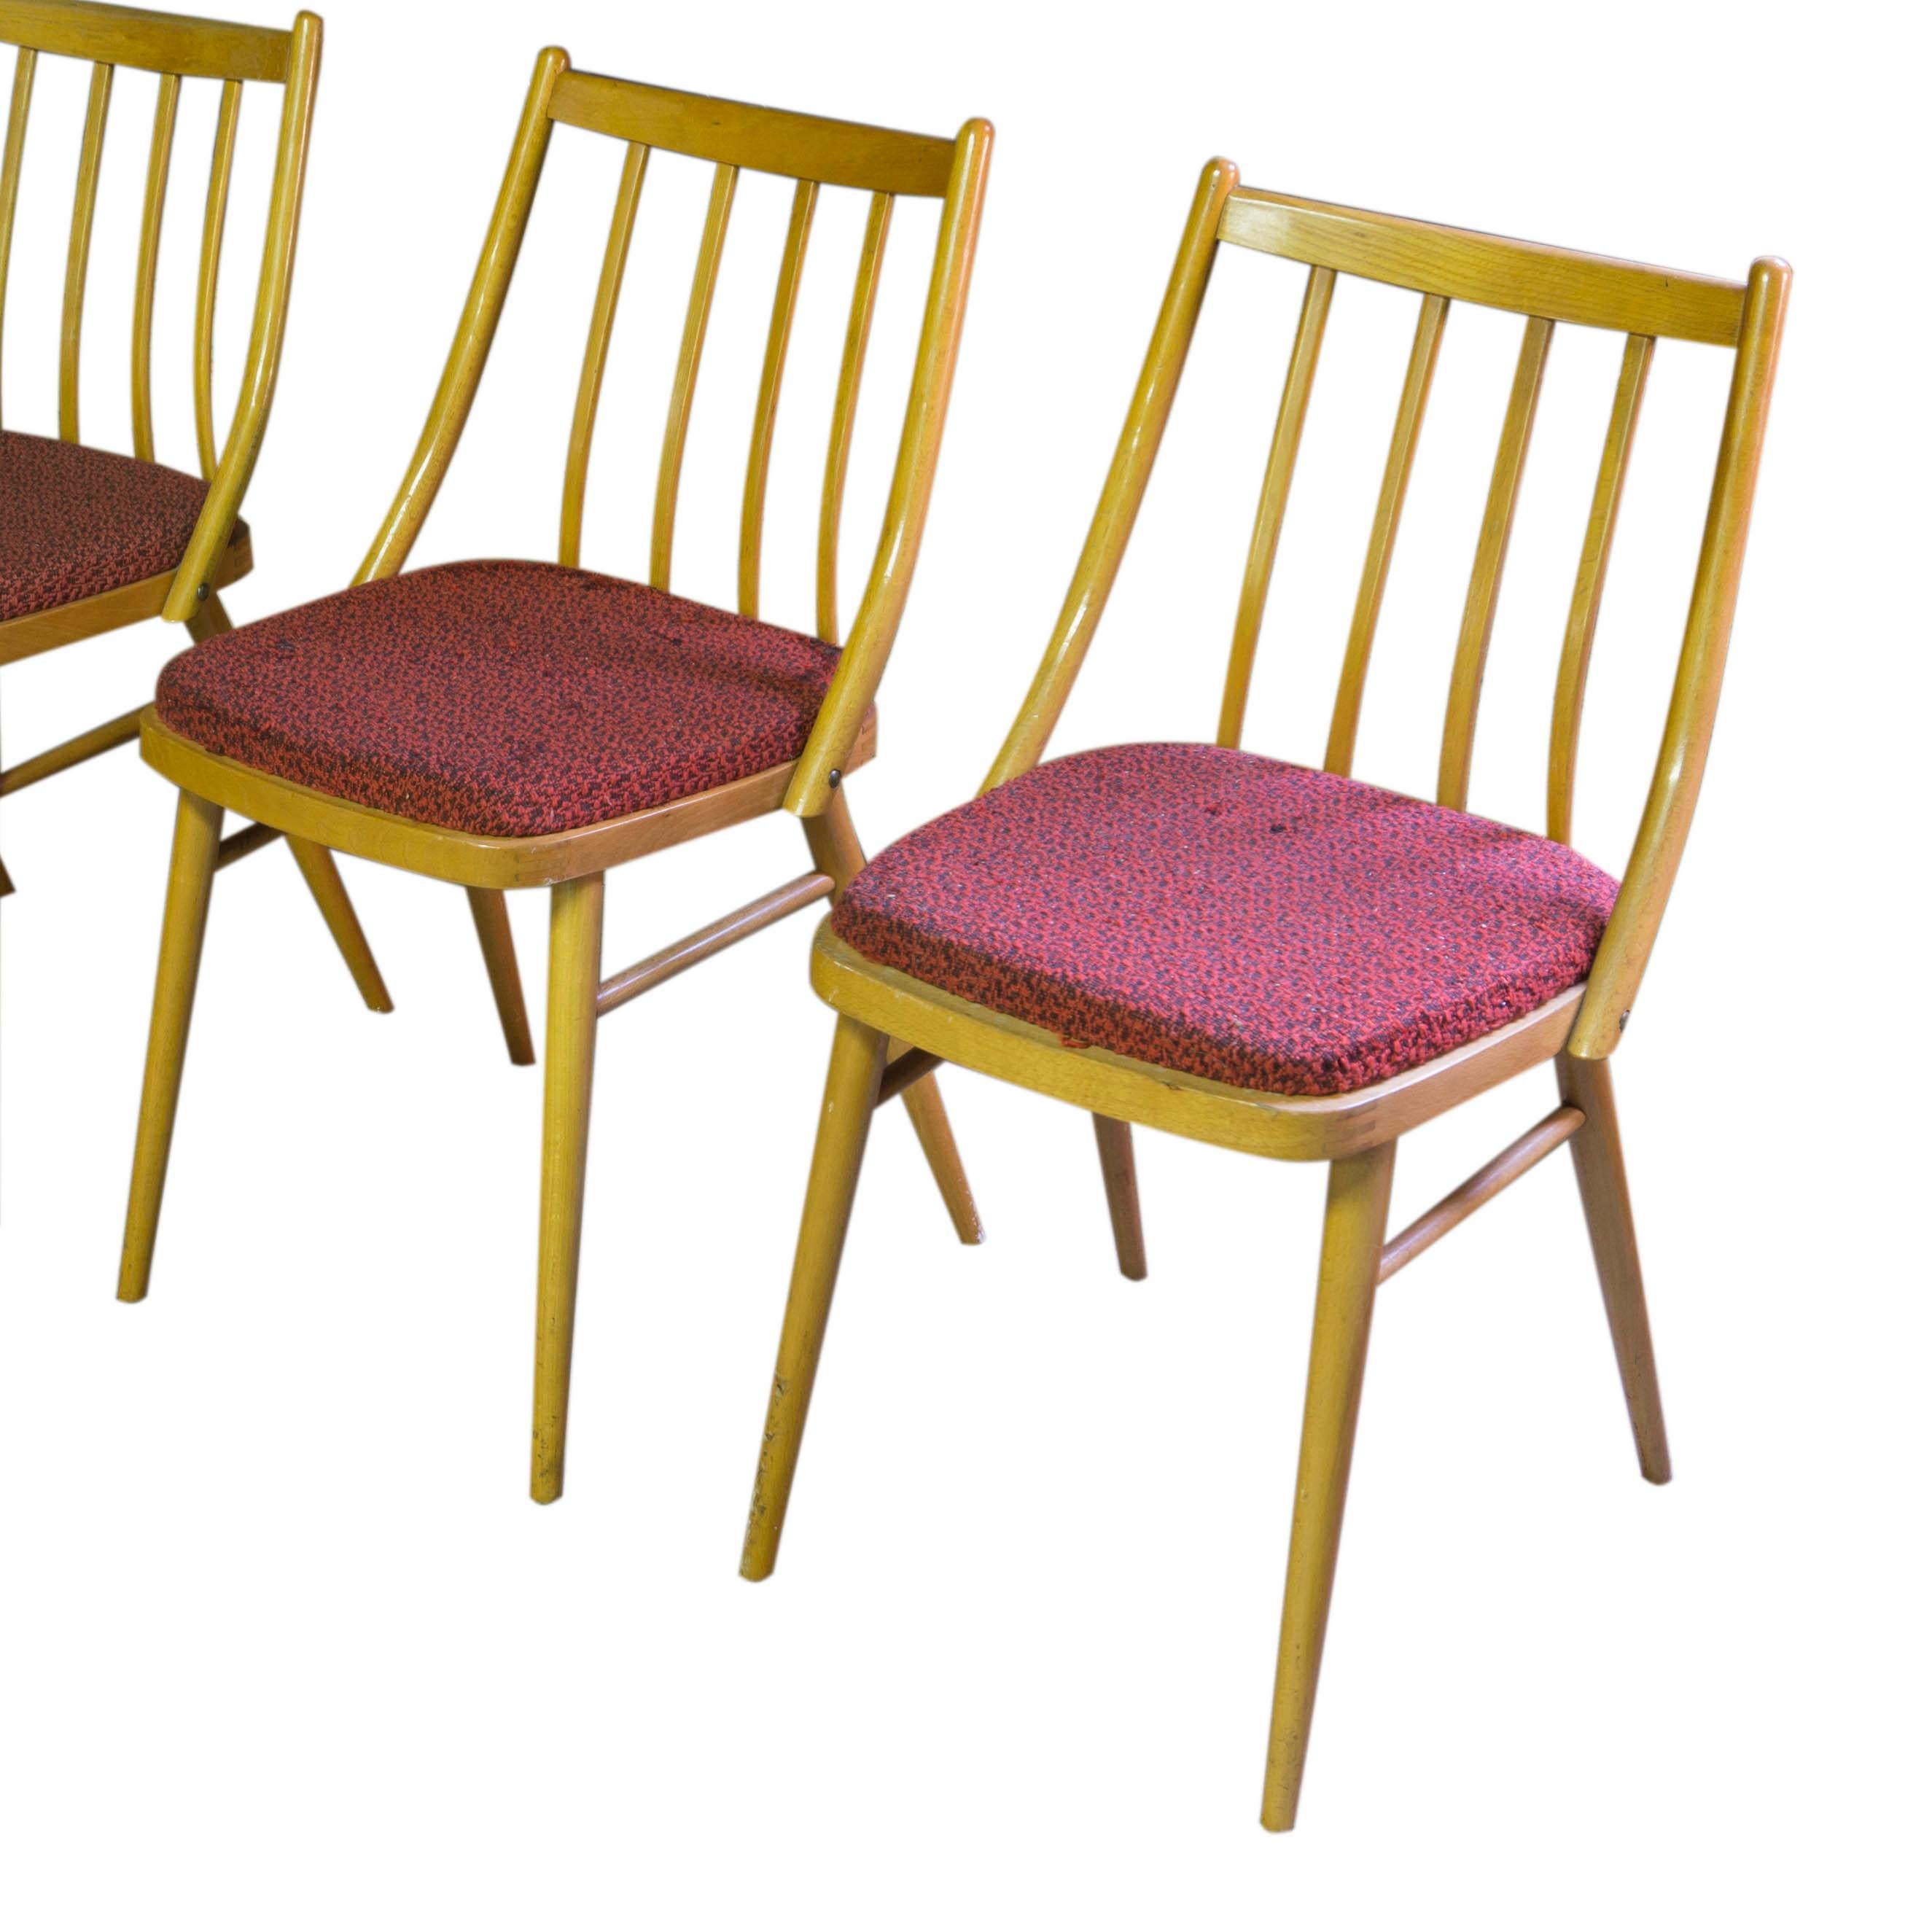 Set of Four Vintage Dining Chairs, TON, 1960s, Czechoslovakia In Good Condition For Sale In Prague 8, CZ